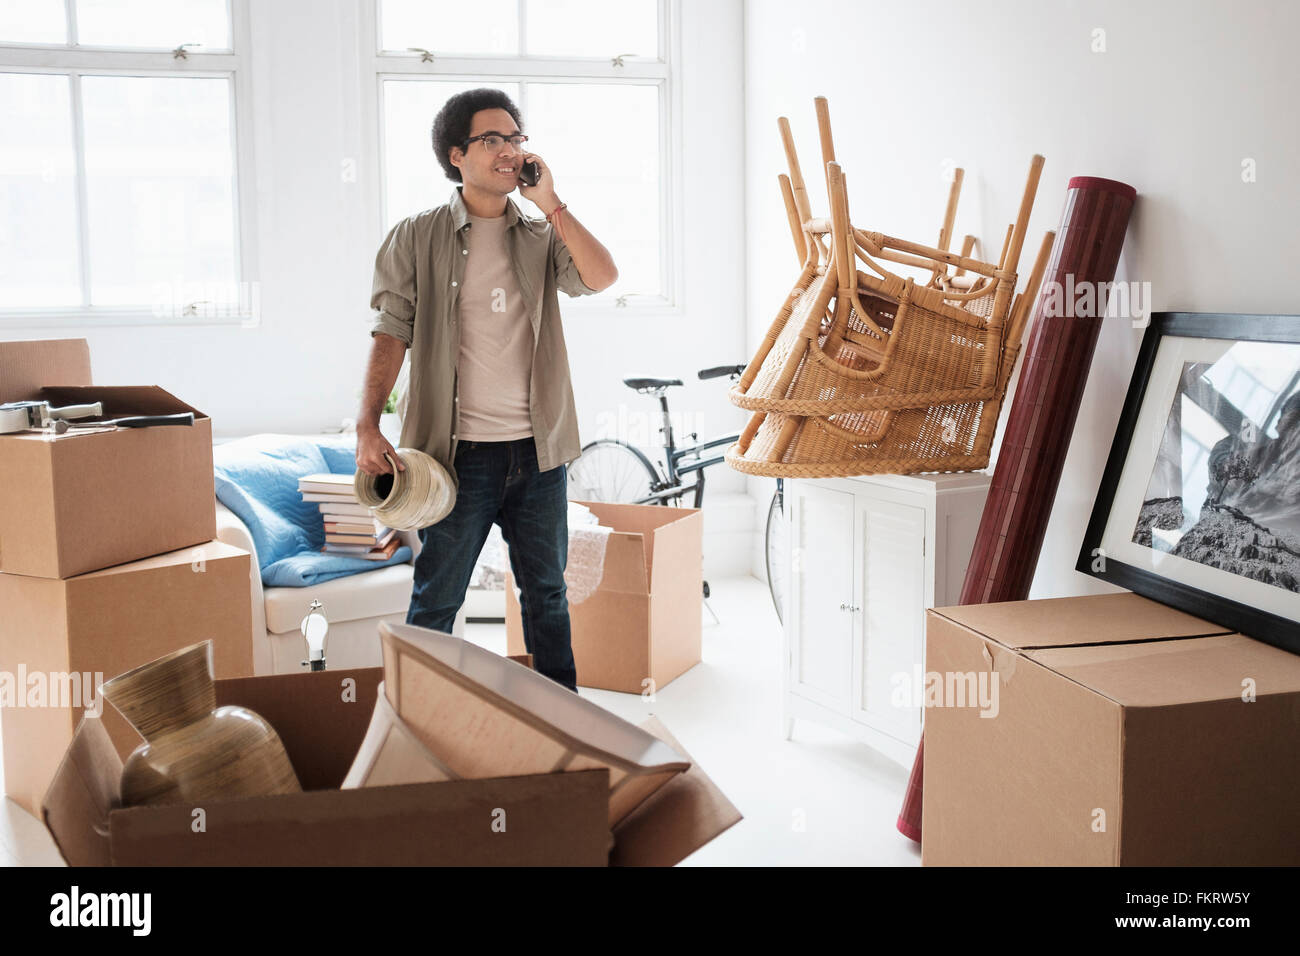 Mixed race man unpacking in new home Stock Photo